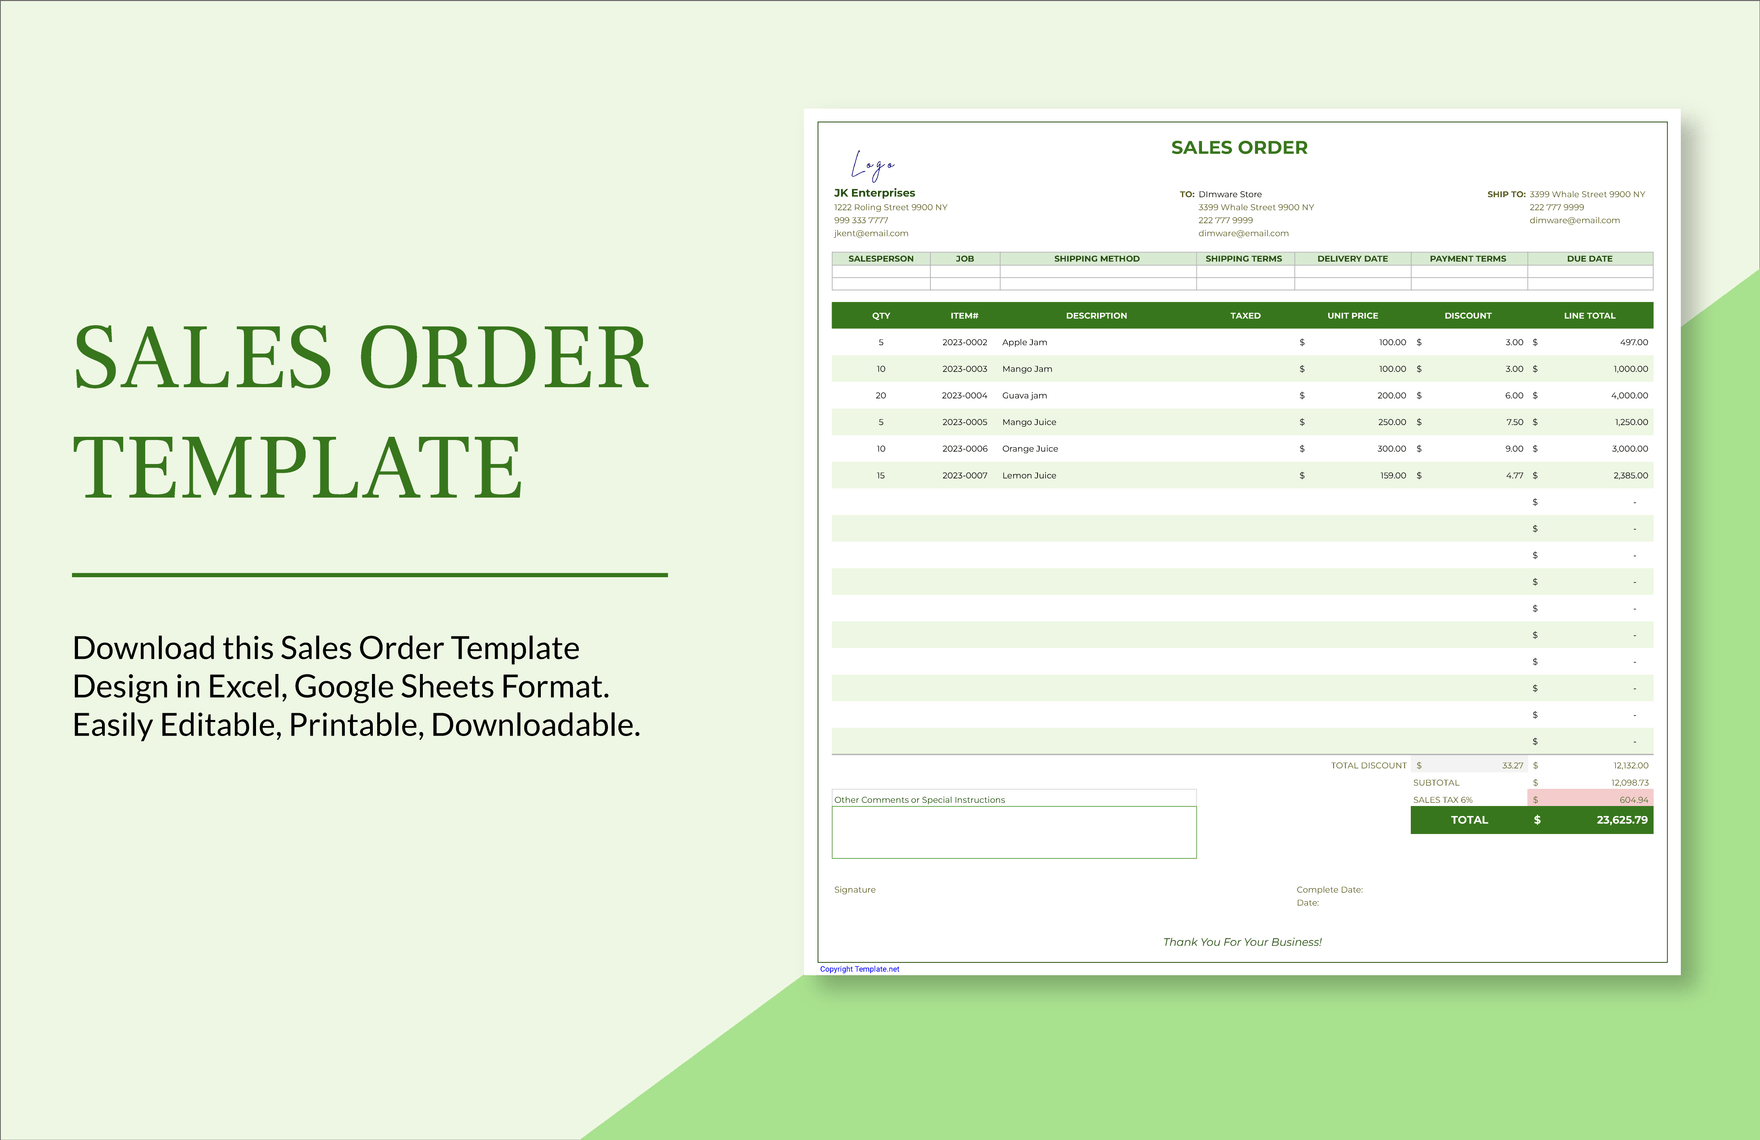 Sales Order Template in Word, Google Docs, Excel, PDF, Google Sheets, Apple Pages, Apple Numbers